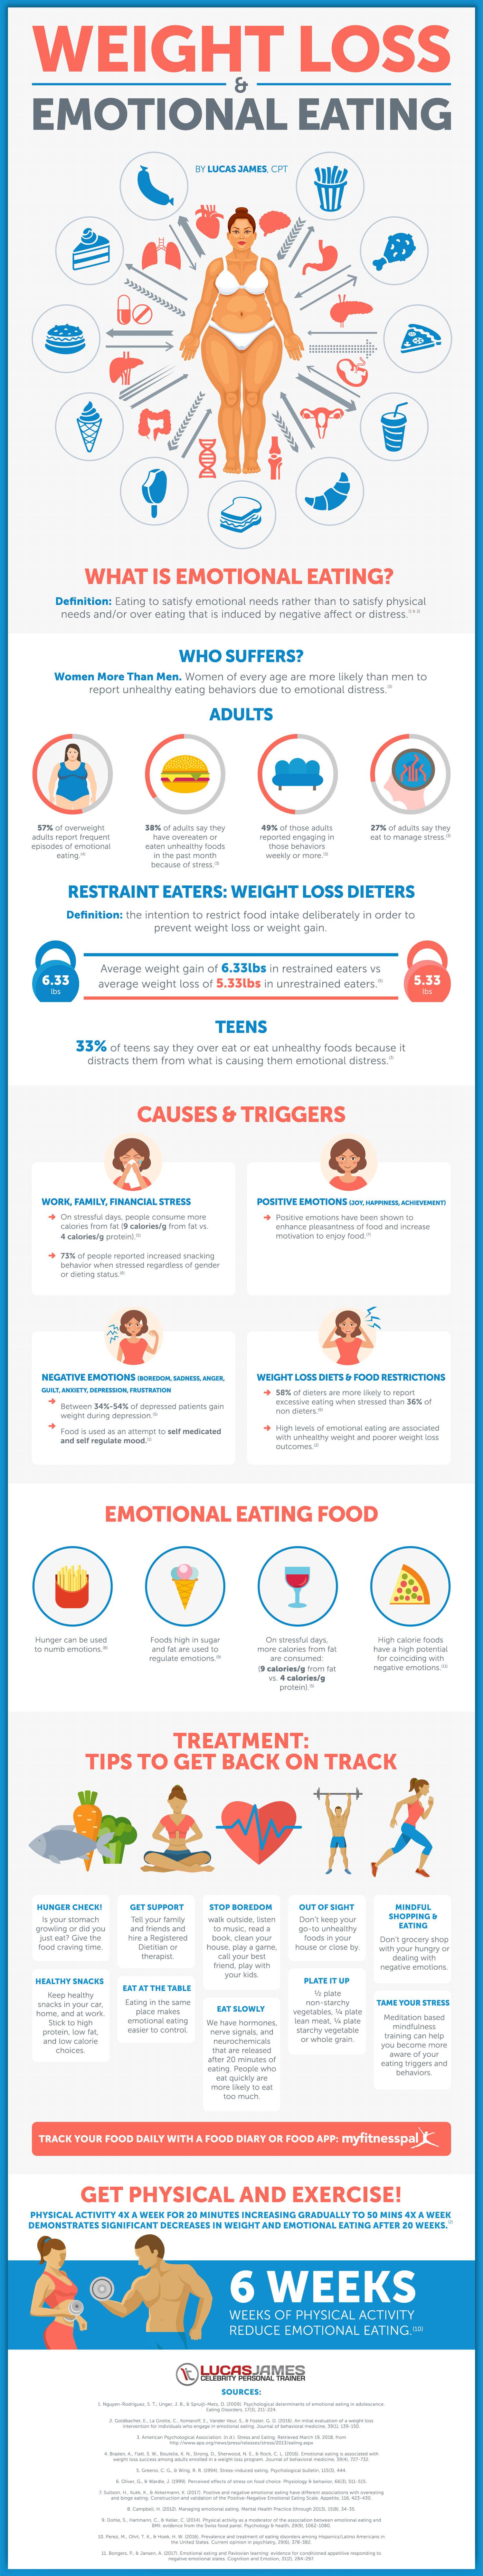 Weight Loss For Emotional Eating #Infographic - Visualistan